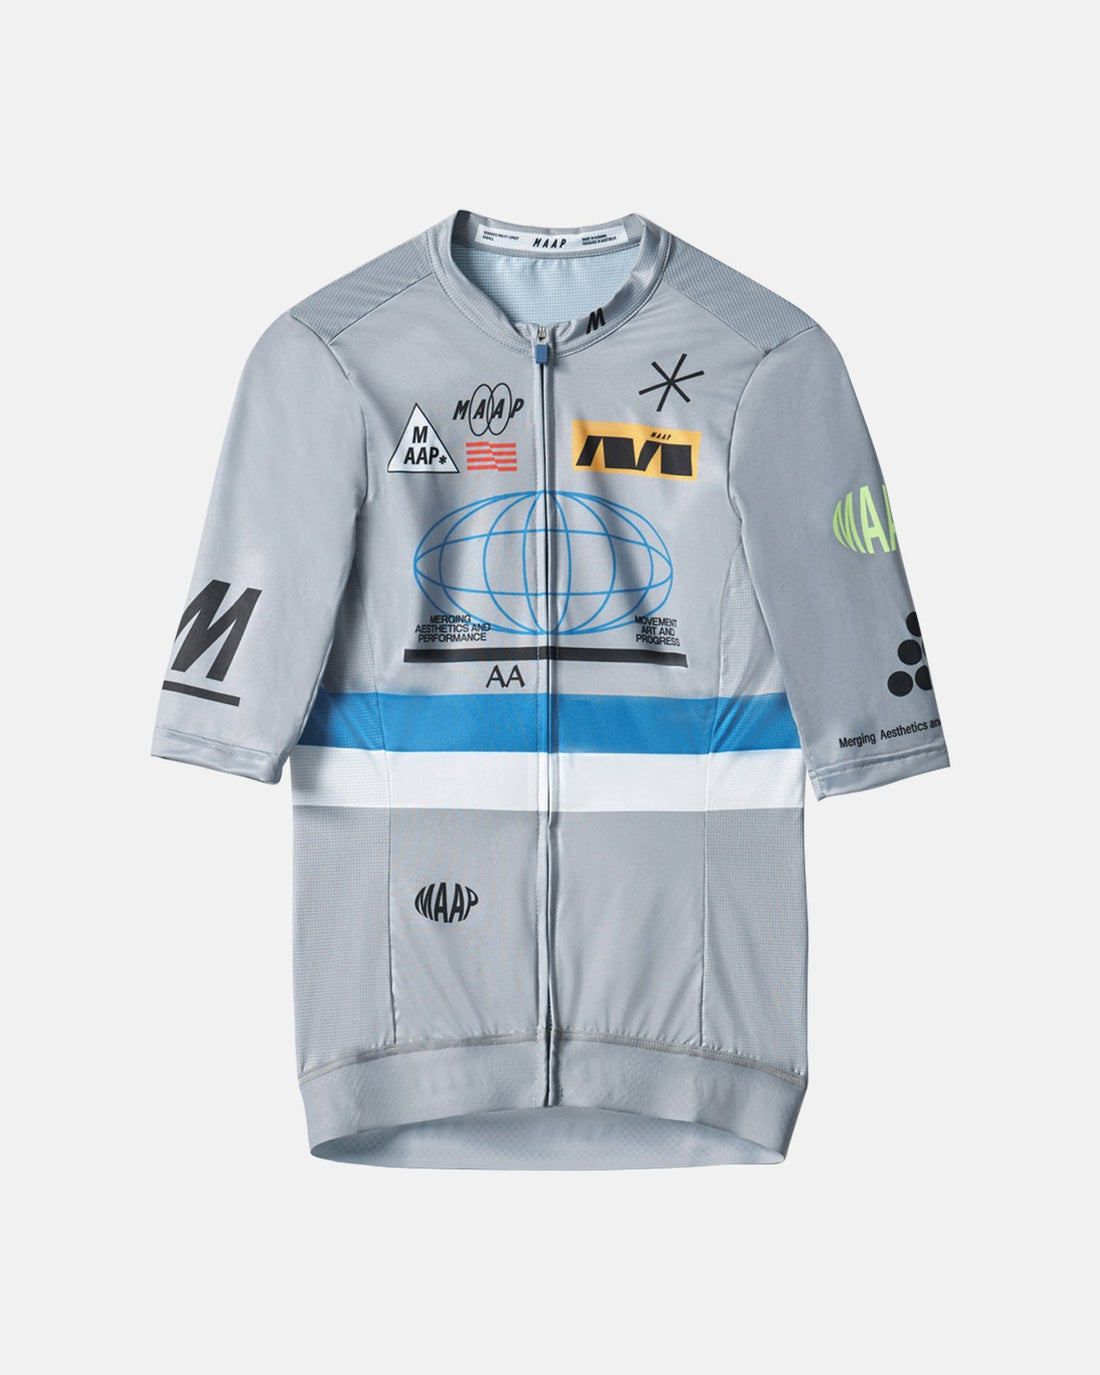 MAAP Axis Pro Jersey - Storm | Enroute.cc